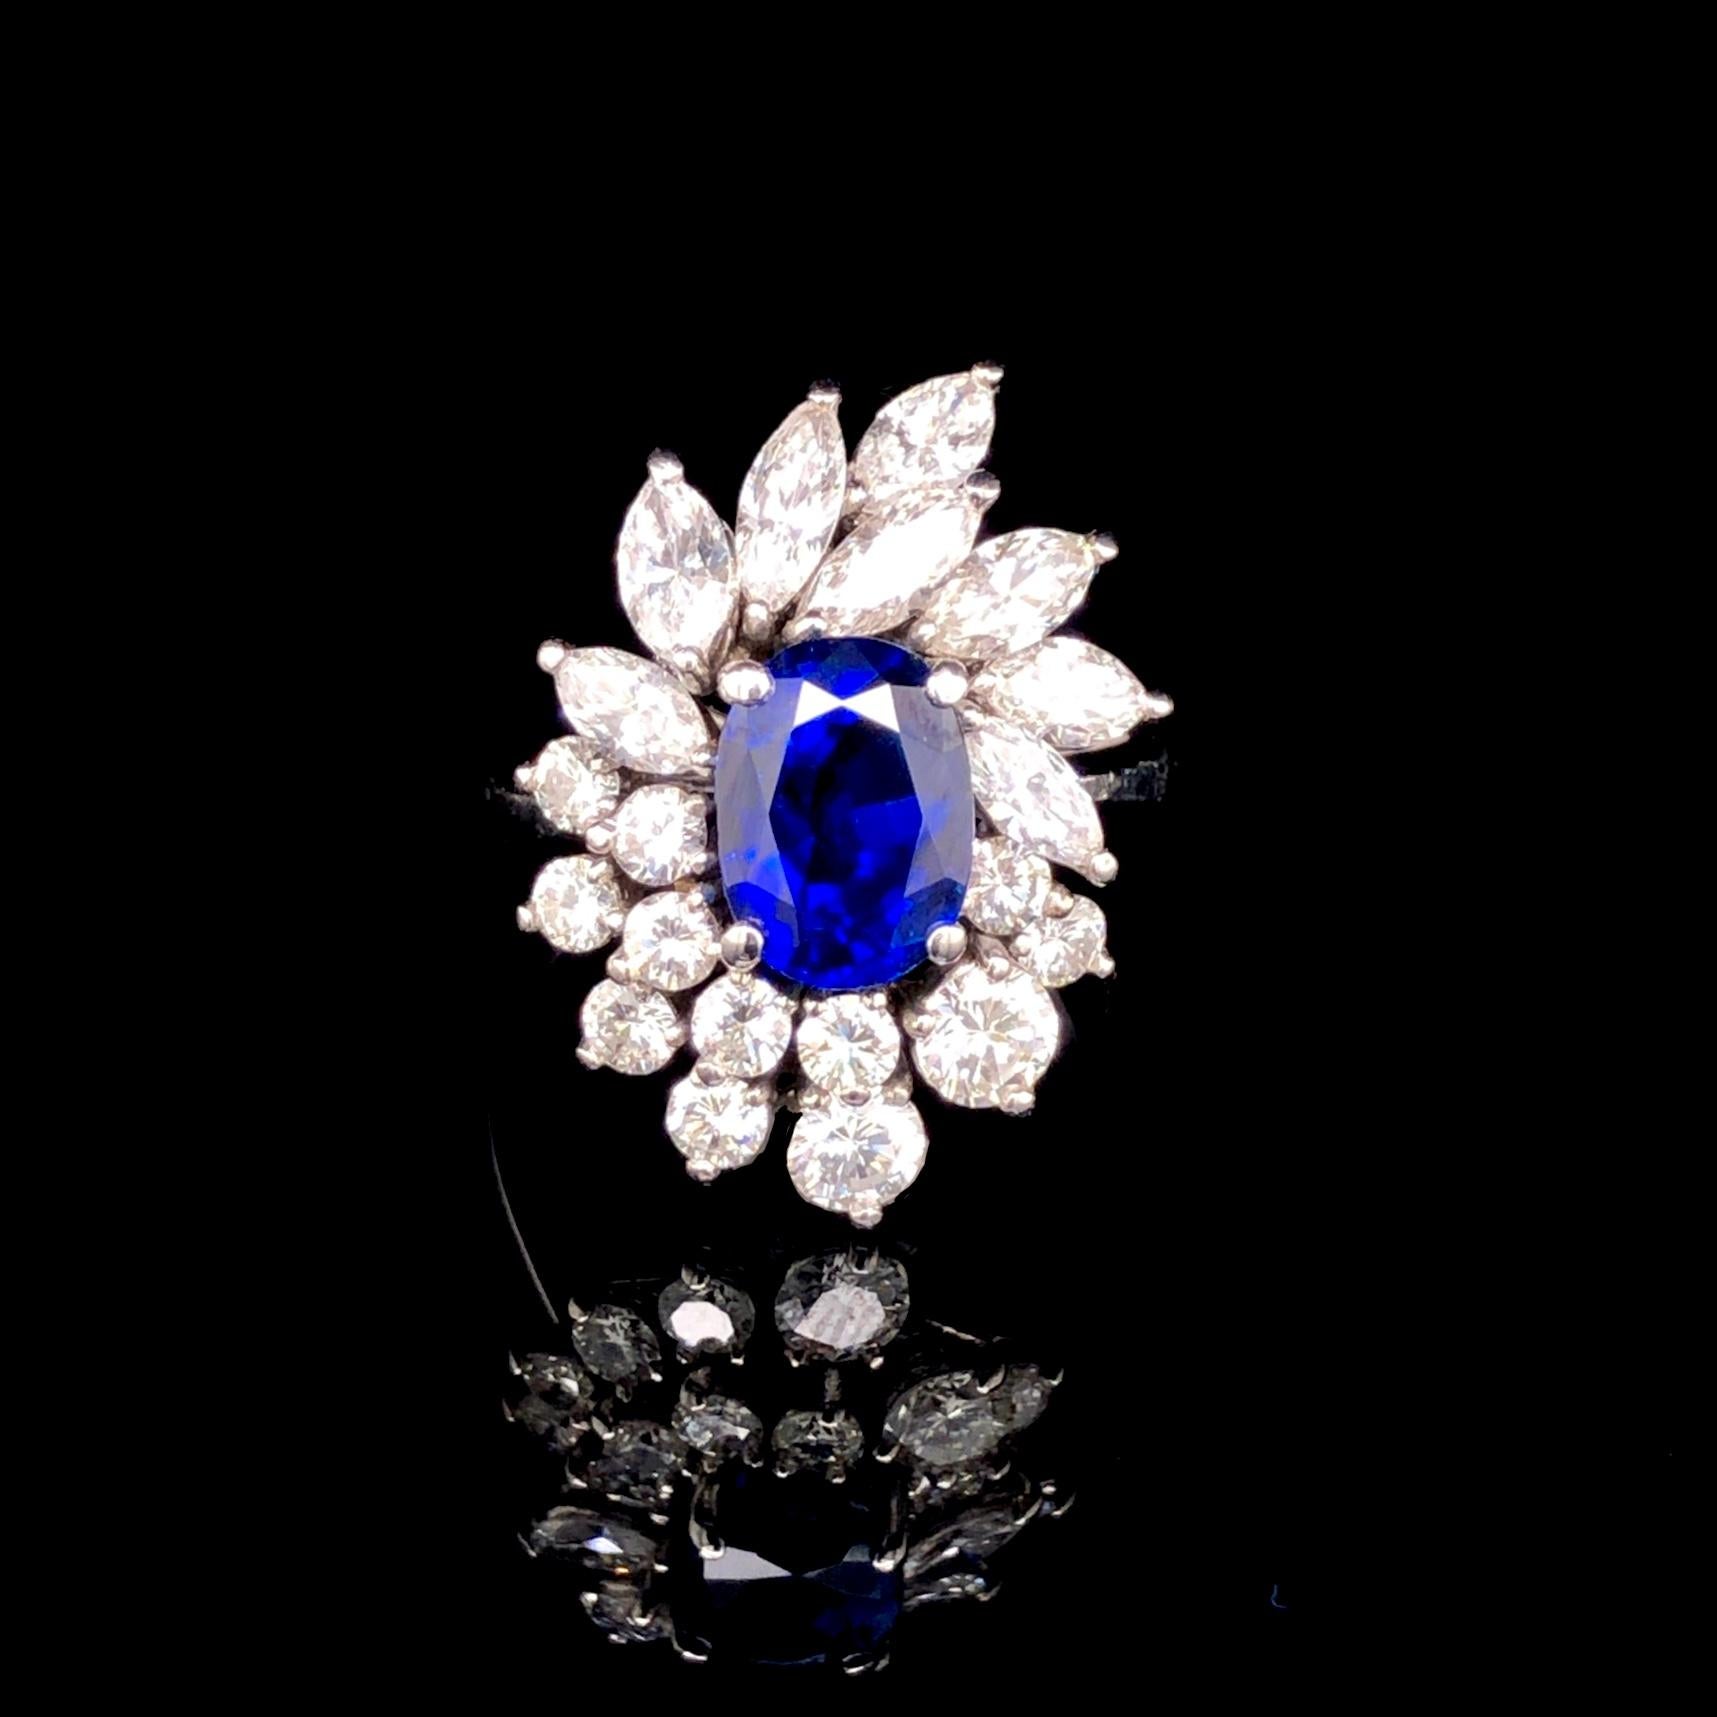 A beautiful sapphire and diamond ring in white gold. The centre sapphire weighs 2.817 carats. It is natural, not heated, and of Burmese origin. Accompanied by a gemological certificate from DSEF and SSEF, stating that the sapphire has a royal